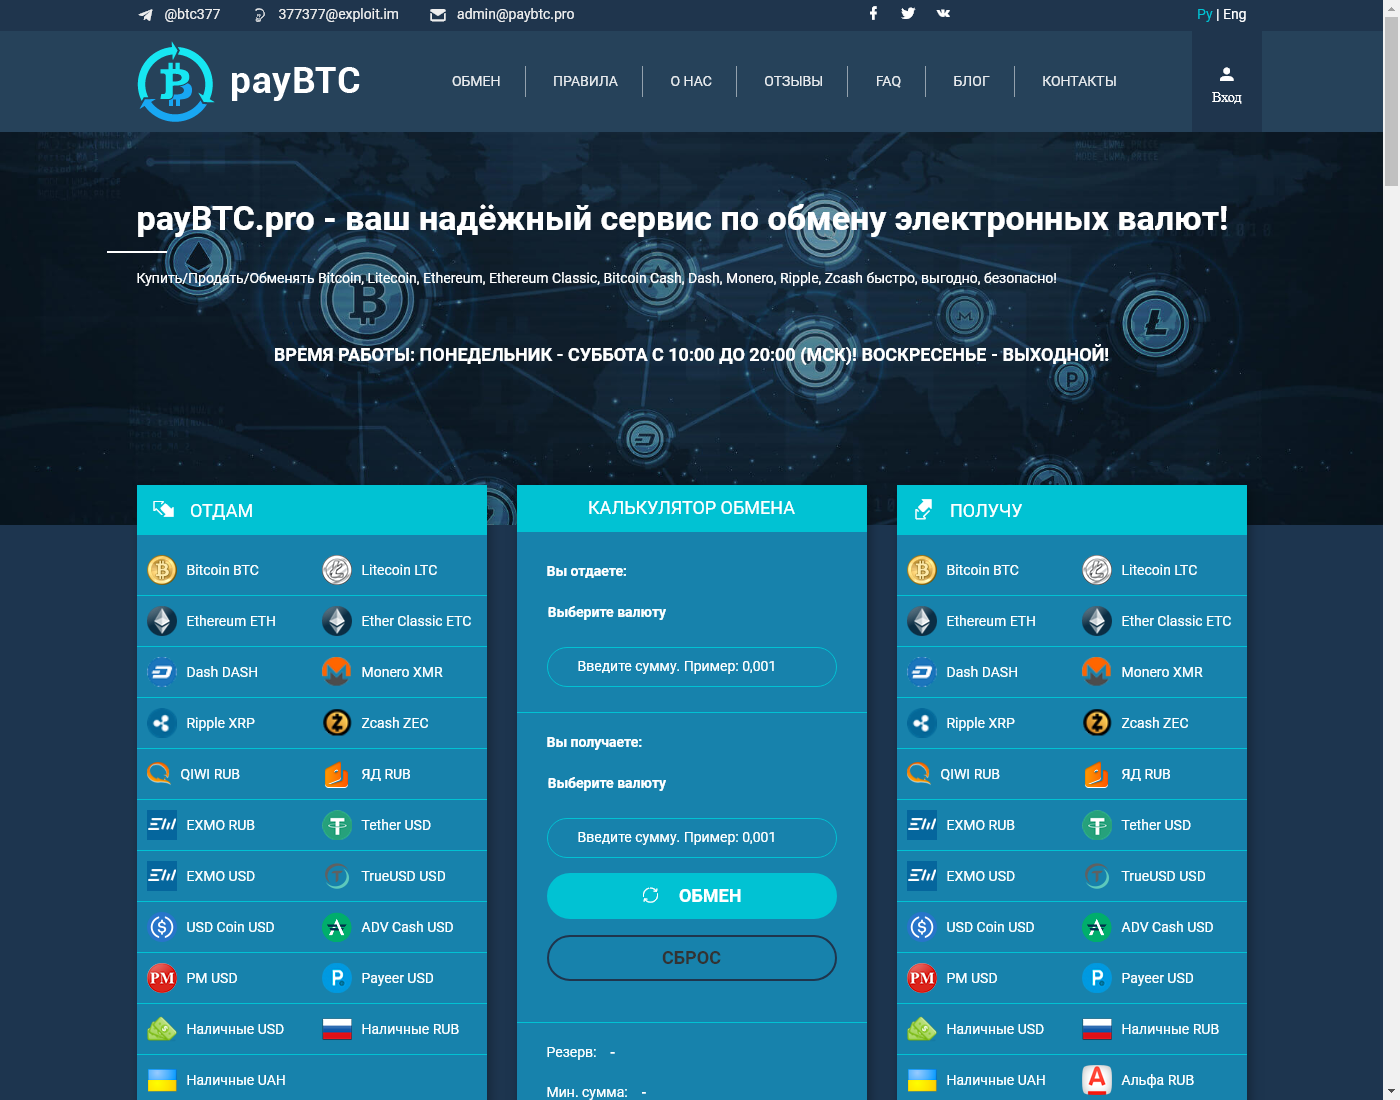 payBTC user interface: the home page in English